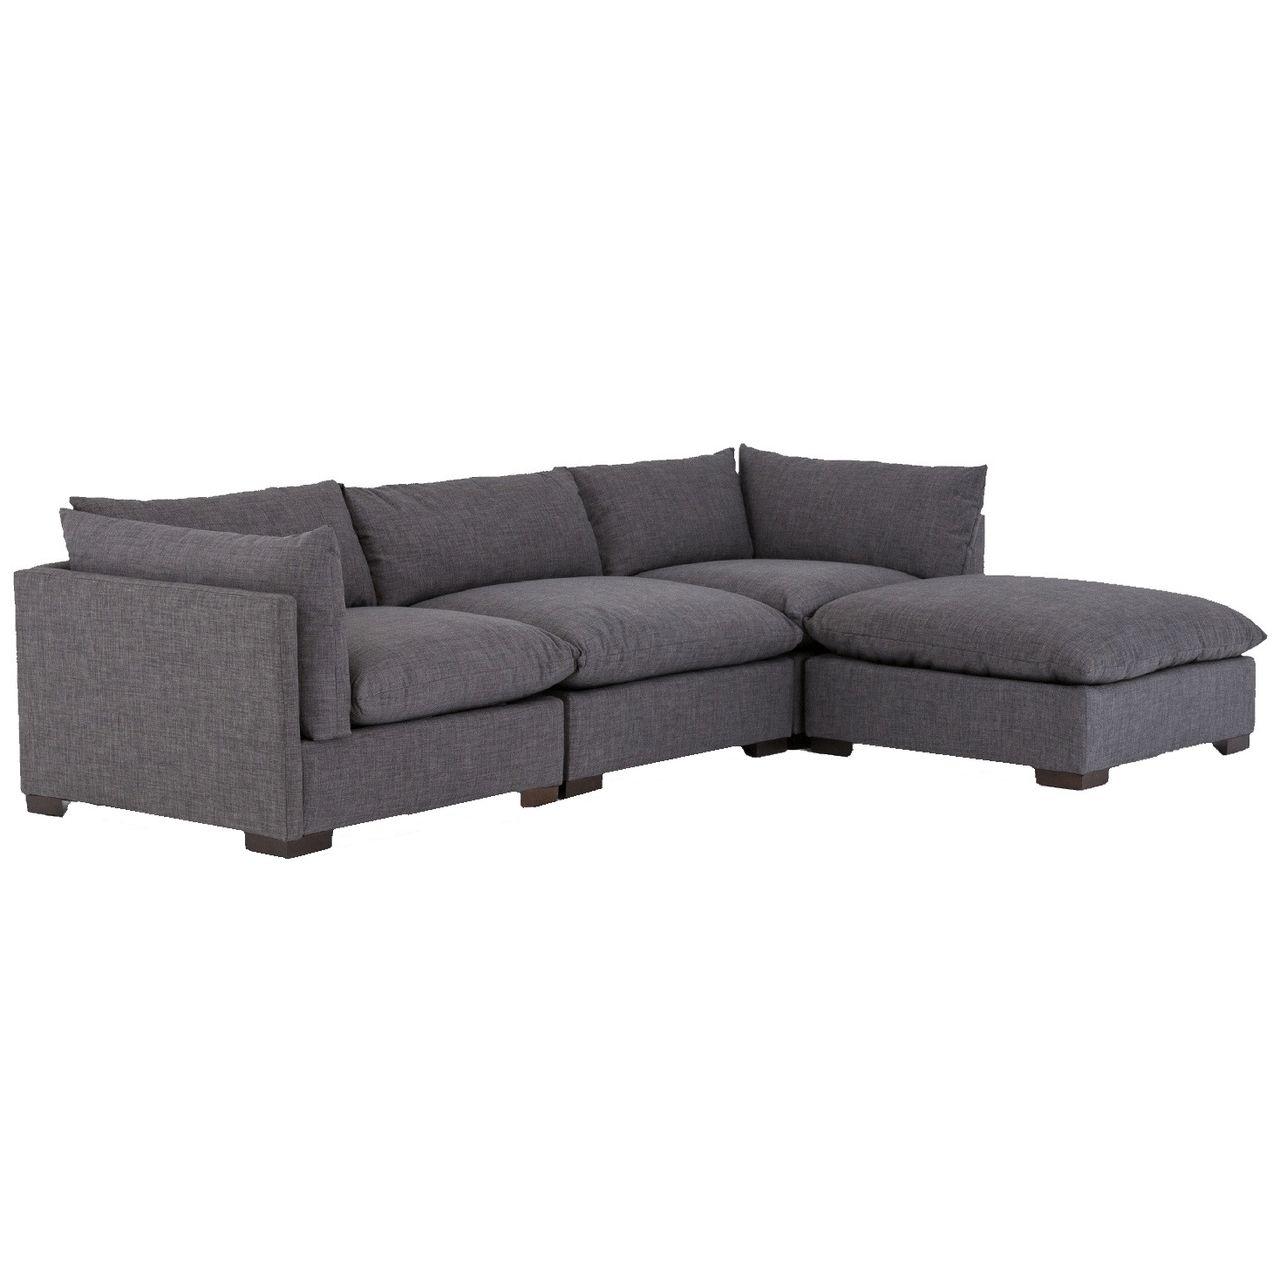 Westworld Modern Gray 4 Piece Modular Lounge Sectional Inside 2pc Burland Contemporary Sectional Sofas Charcoal (View 6 of 15)